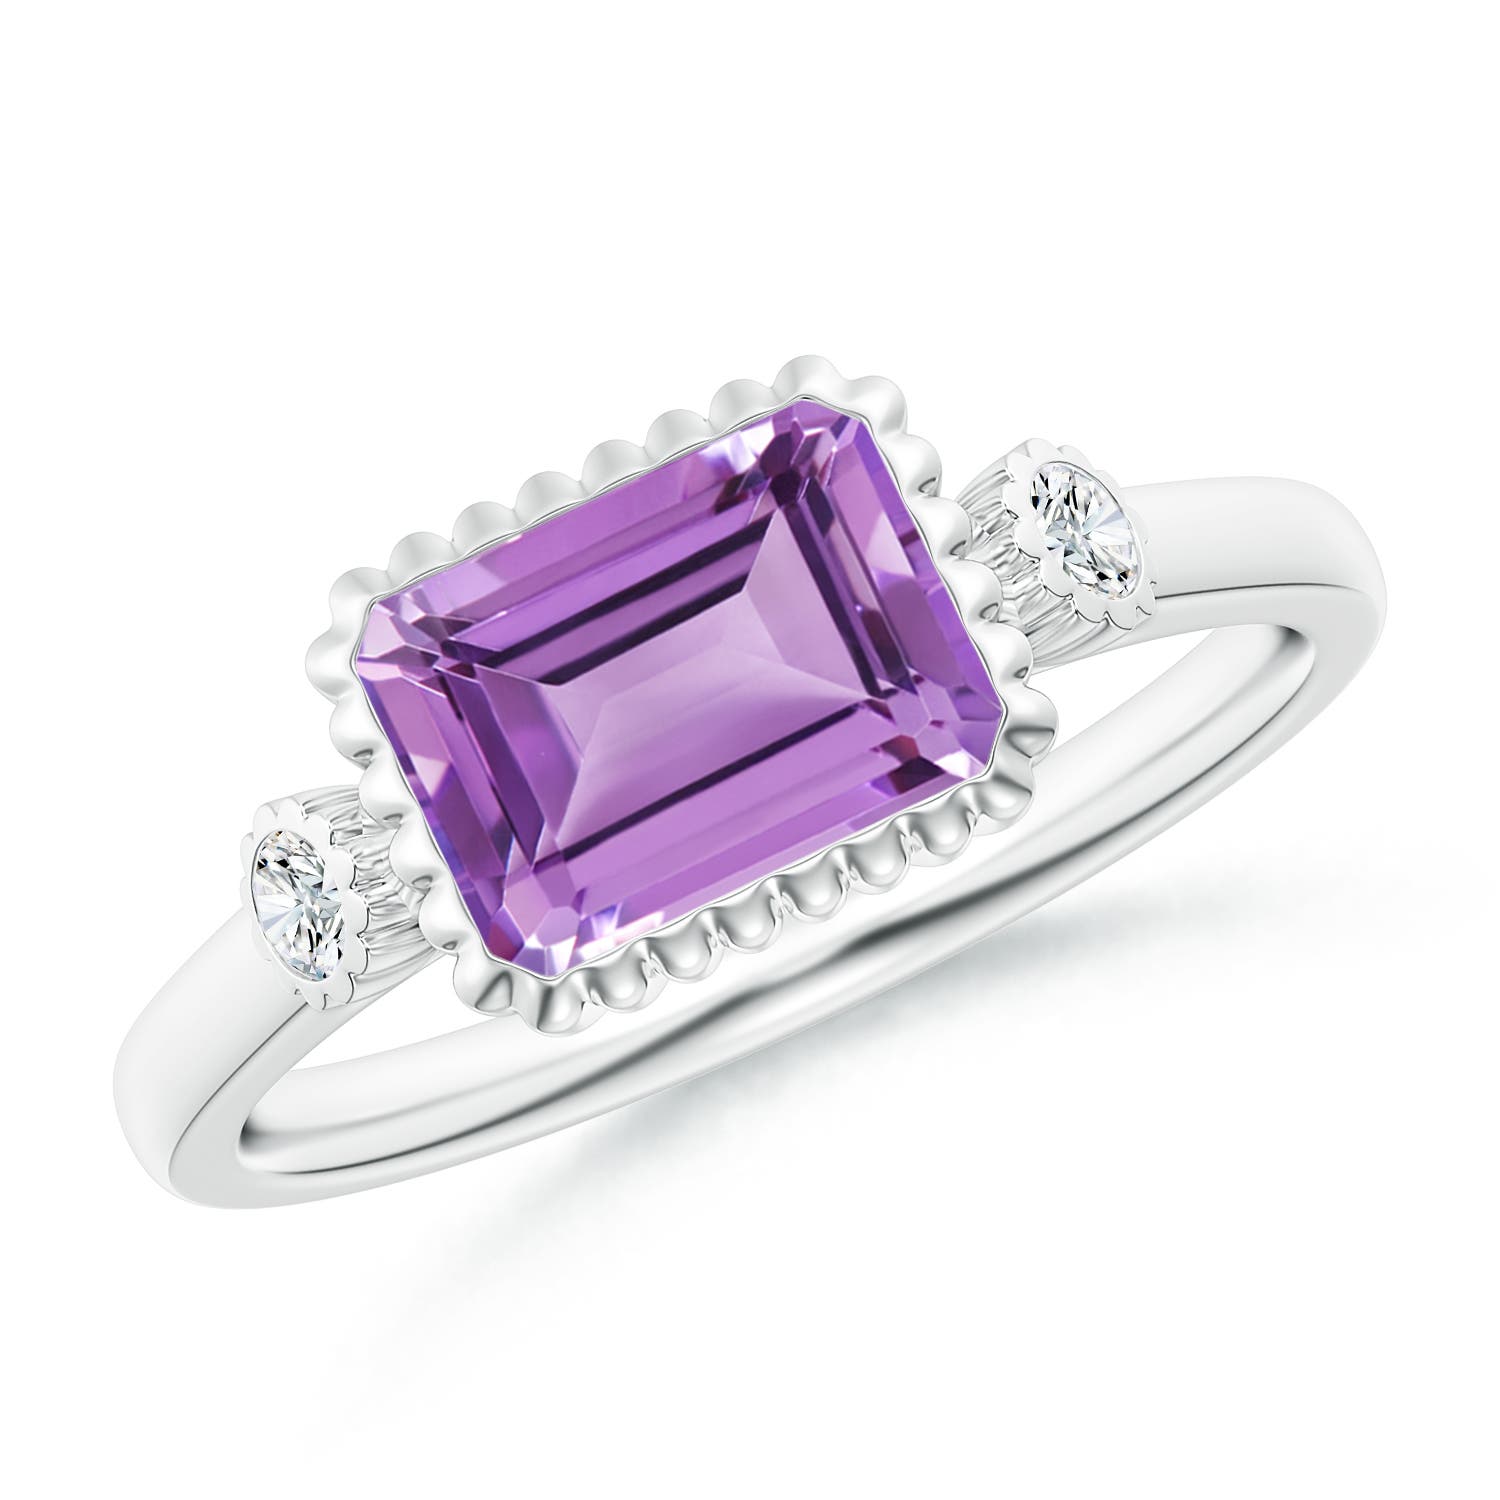 A - Amethyst / 1.59 CT / 14 KT White Gold